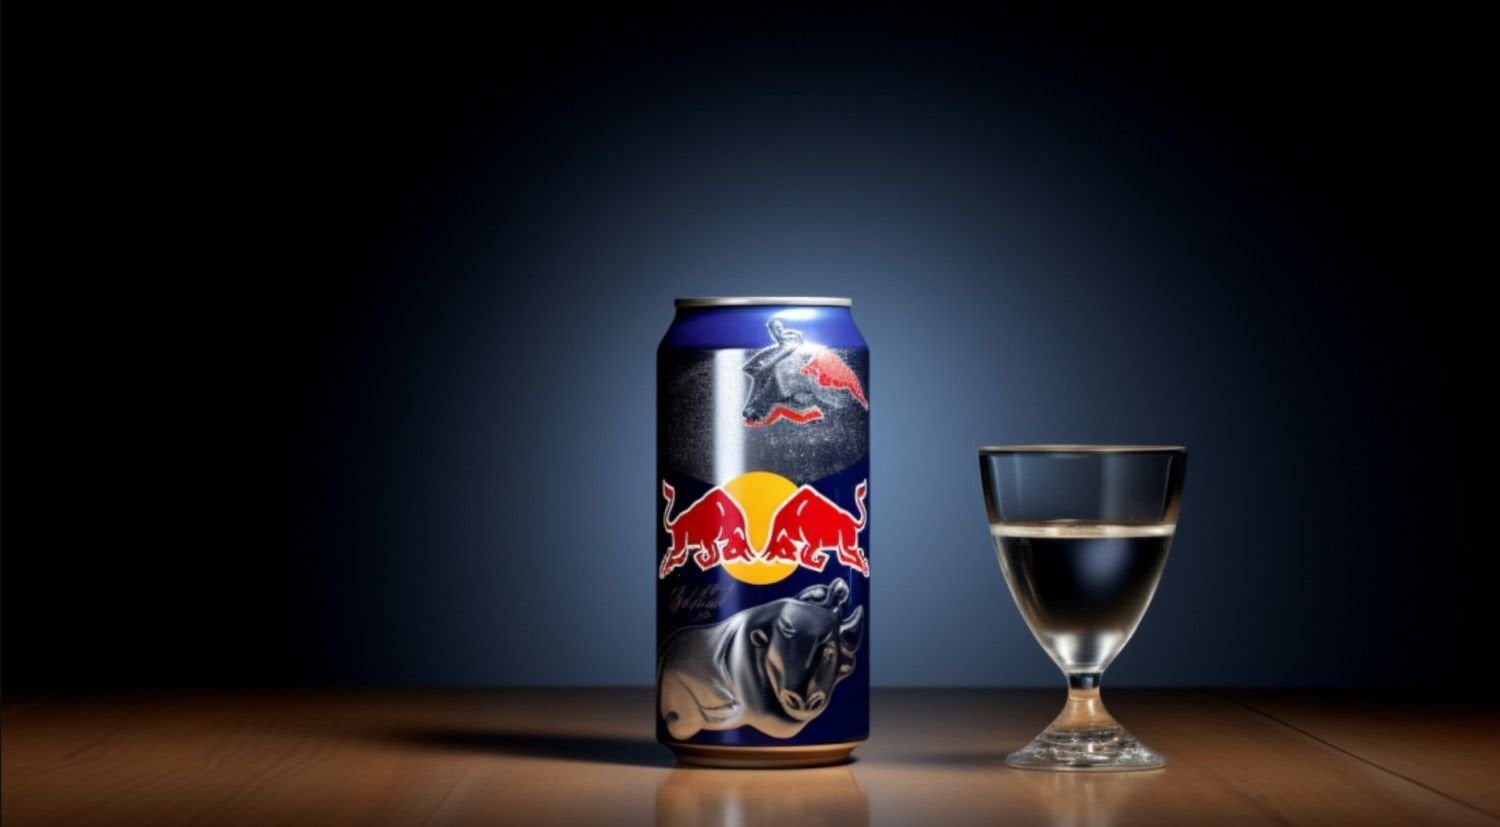 The Surprising Mix-Vodka and Red Bull foran Energy Boos